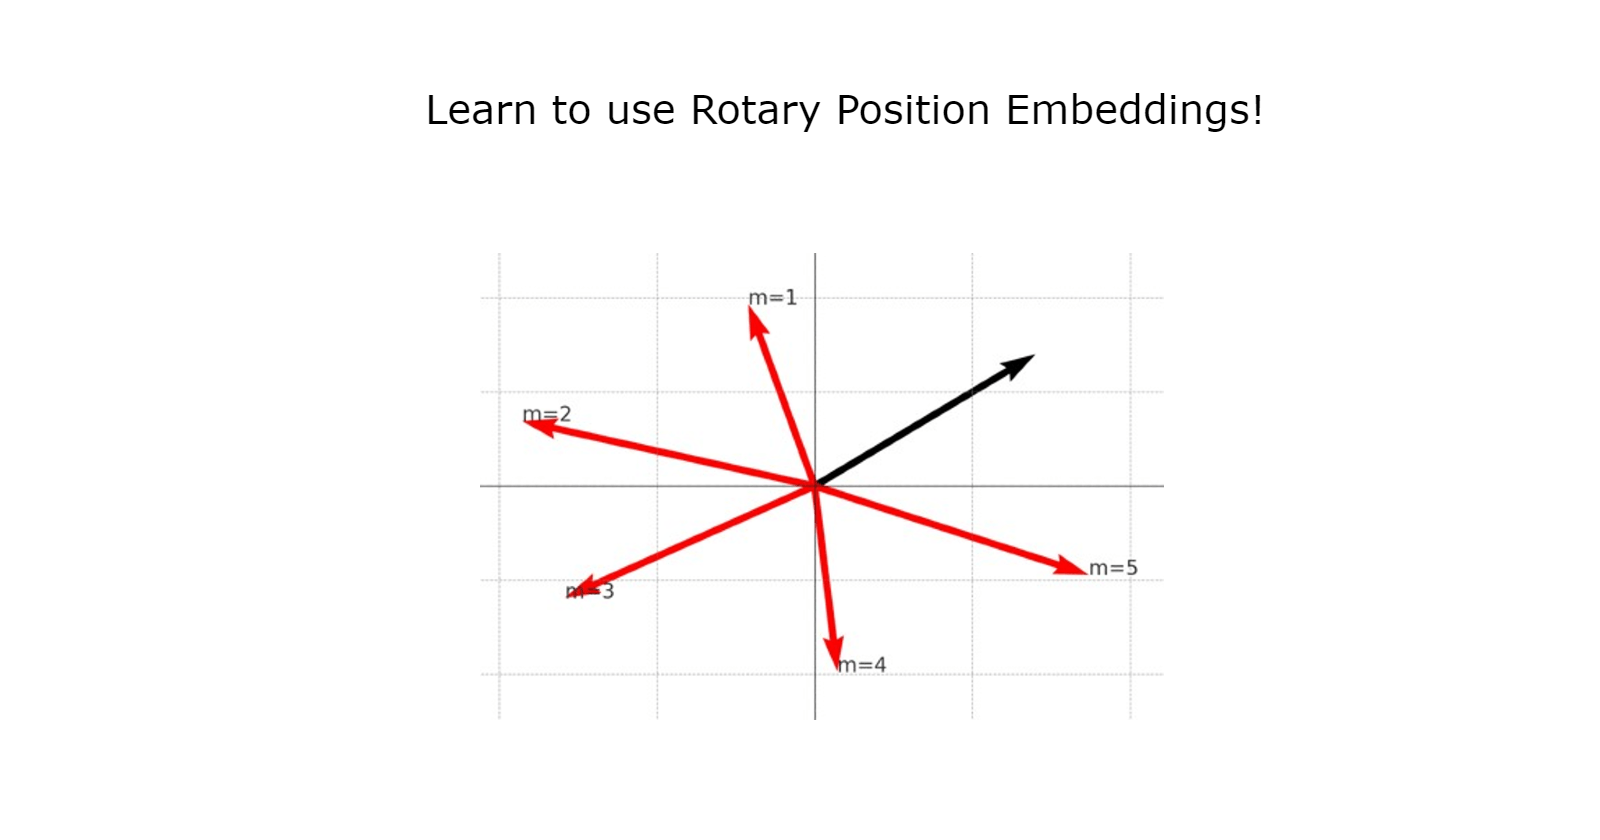 RoPE - Rotary Positional Embedding